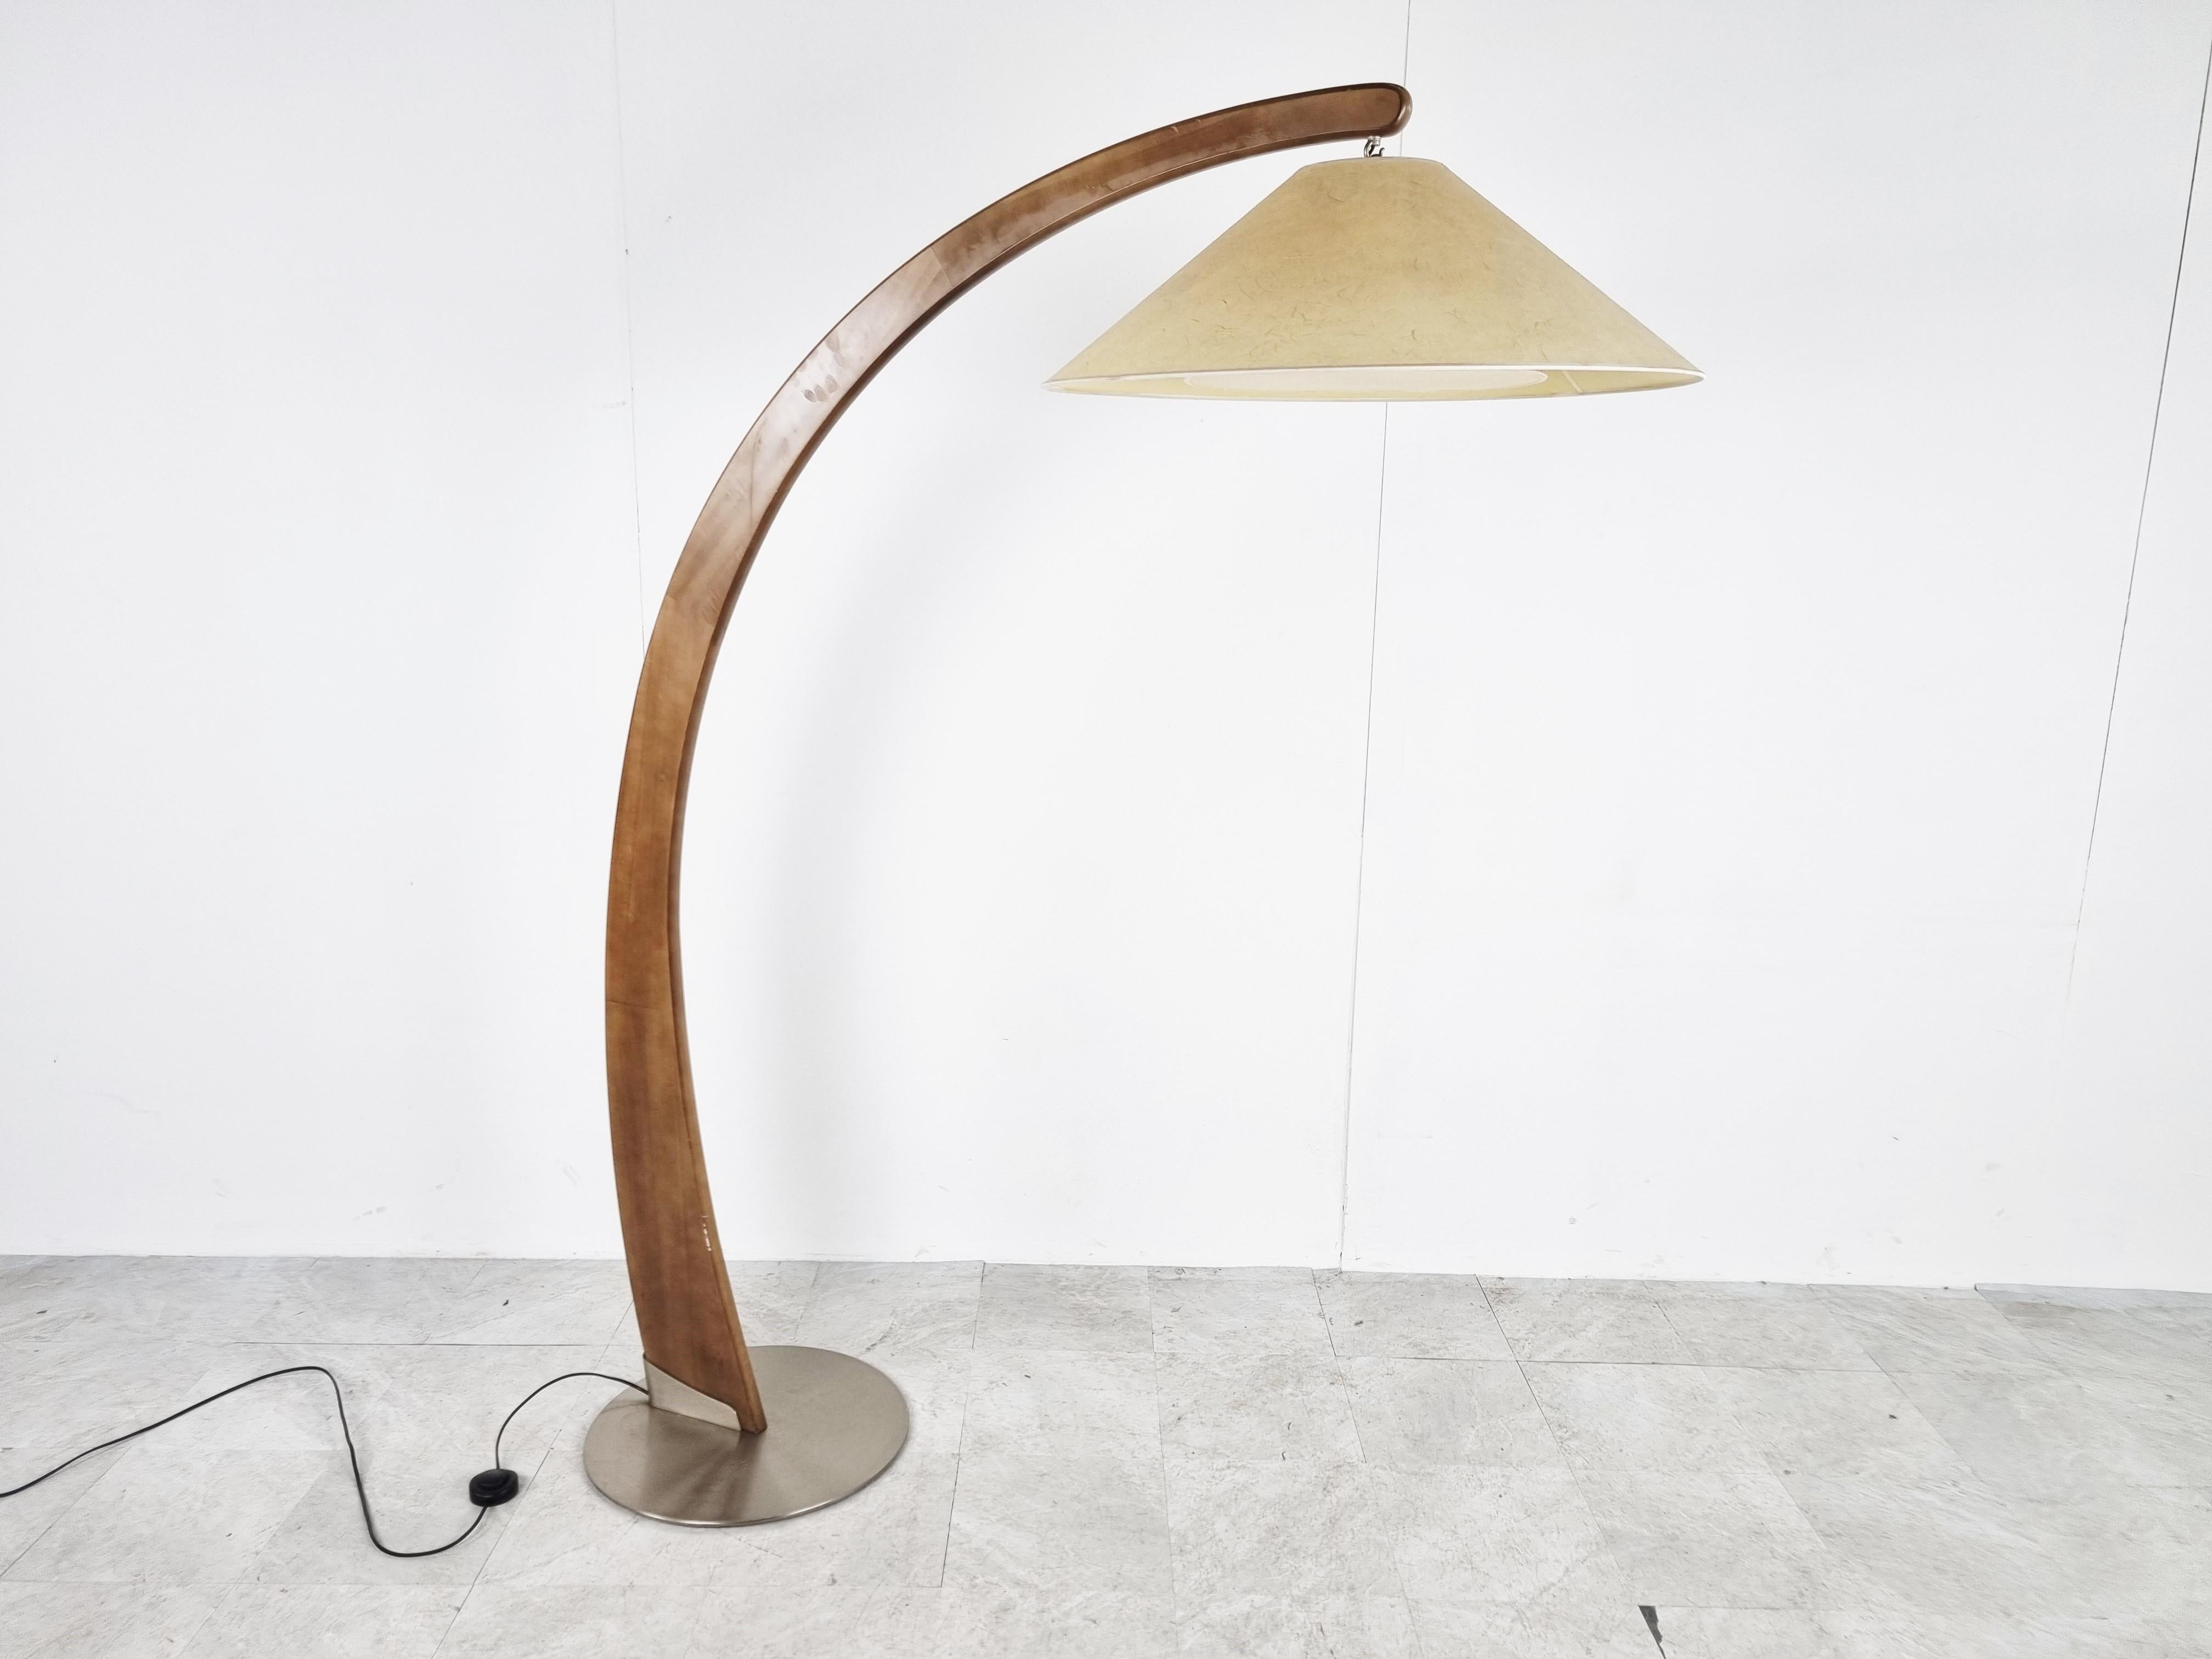 Early 1990s 'luna' floor lamp by Natuzzi.

This rather large floor light has a beautiful elegant look thanks to it's fantastically shaped wooden arm.

Contrasting metal base and off white lamp shade which emist a beautiful warm dim